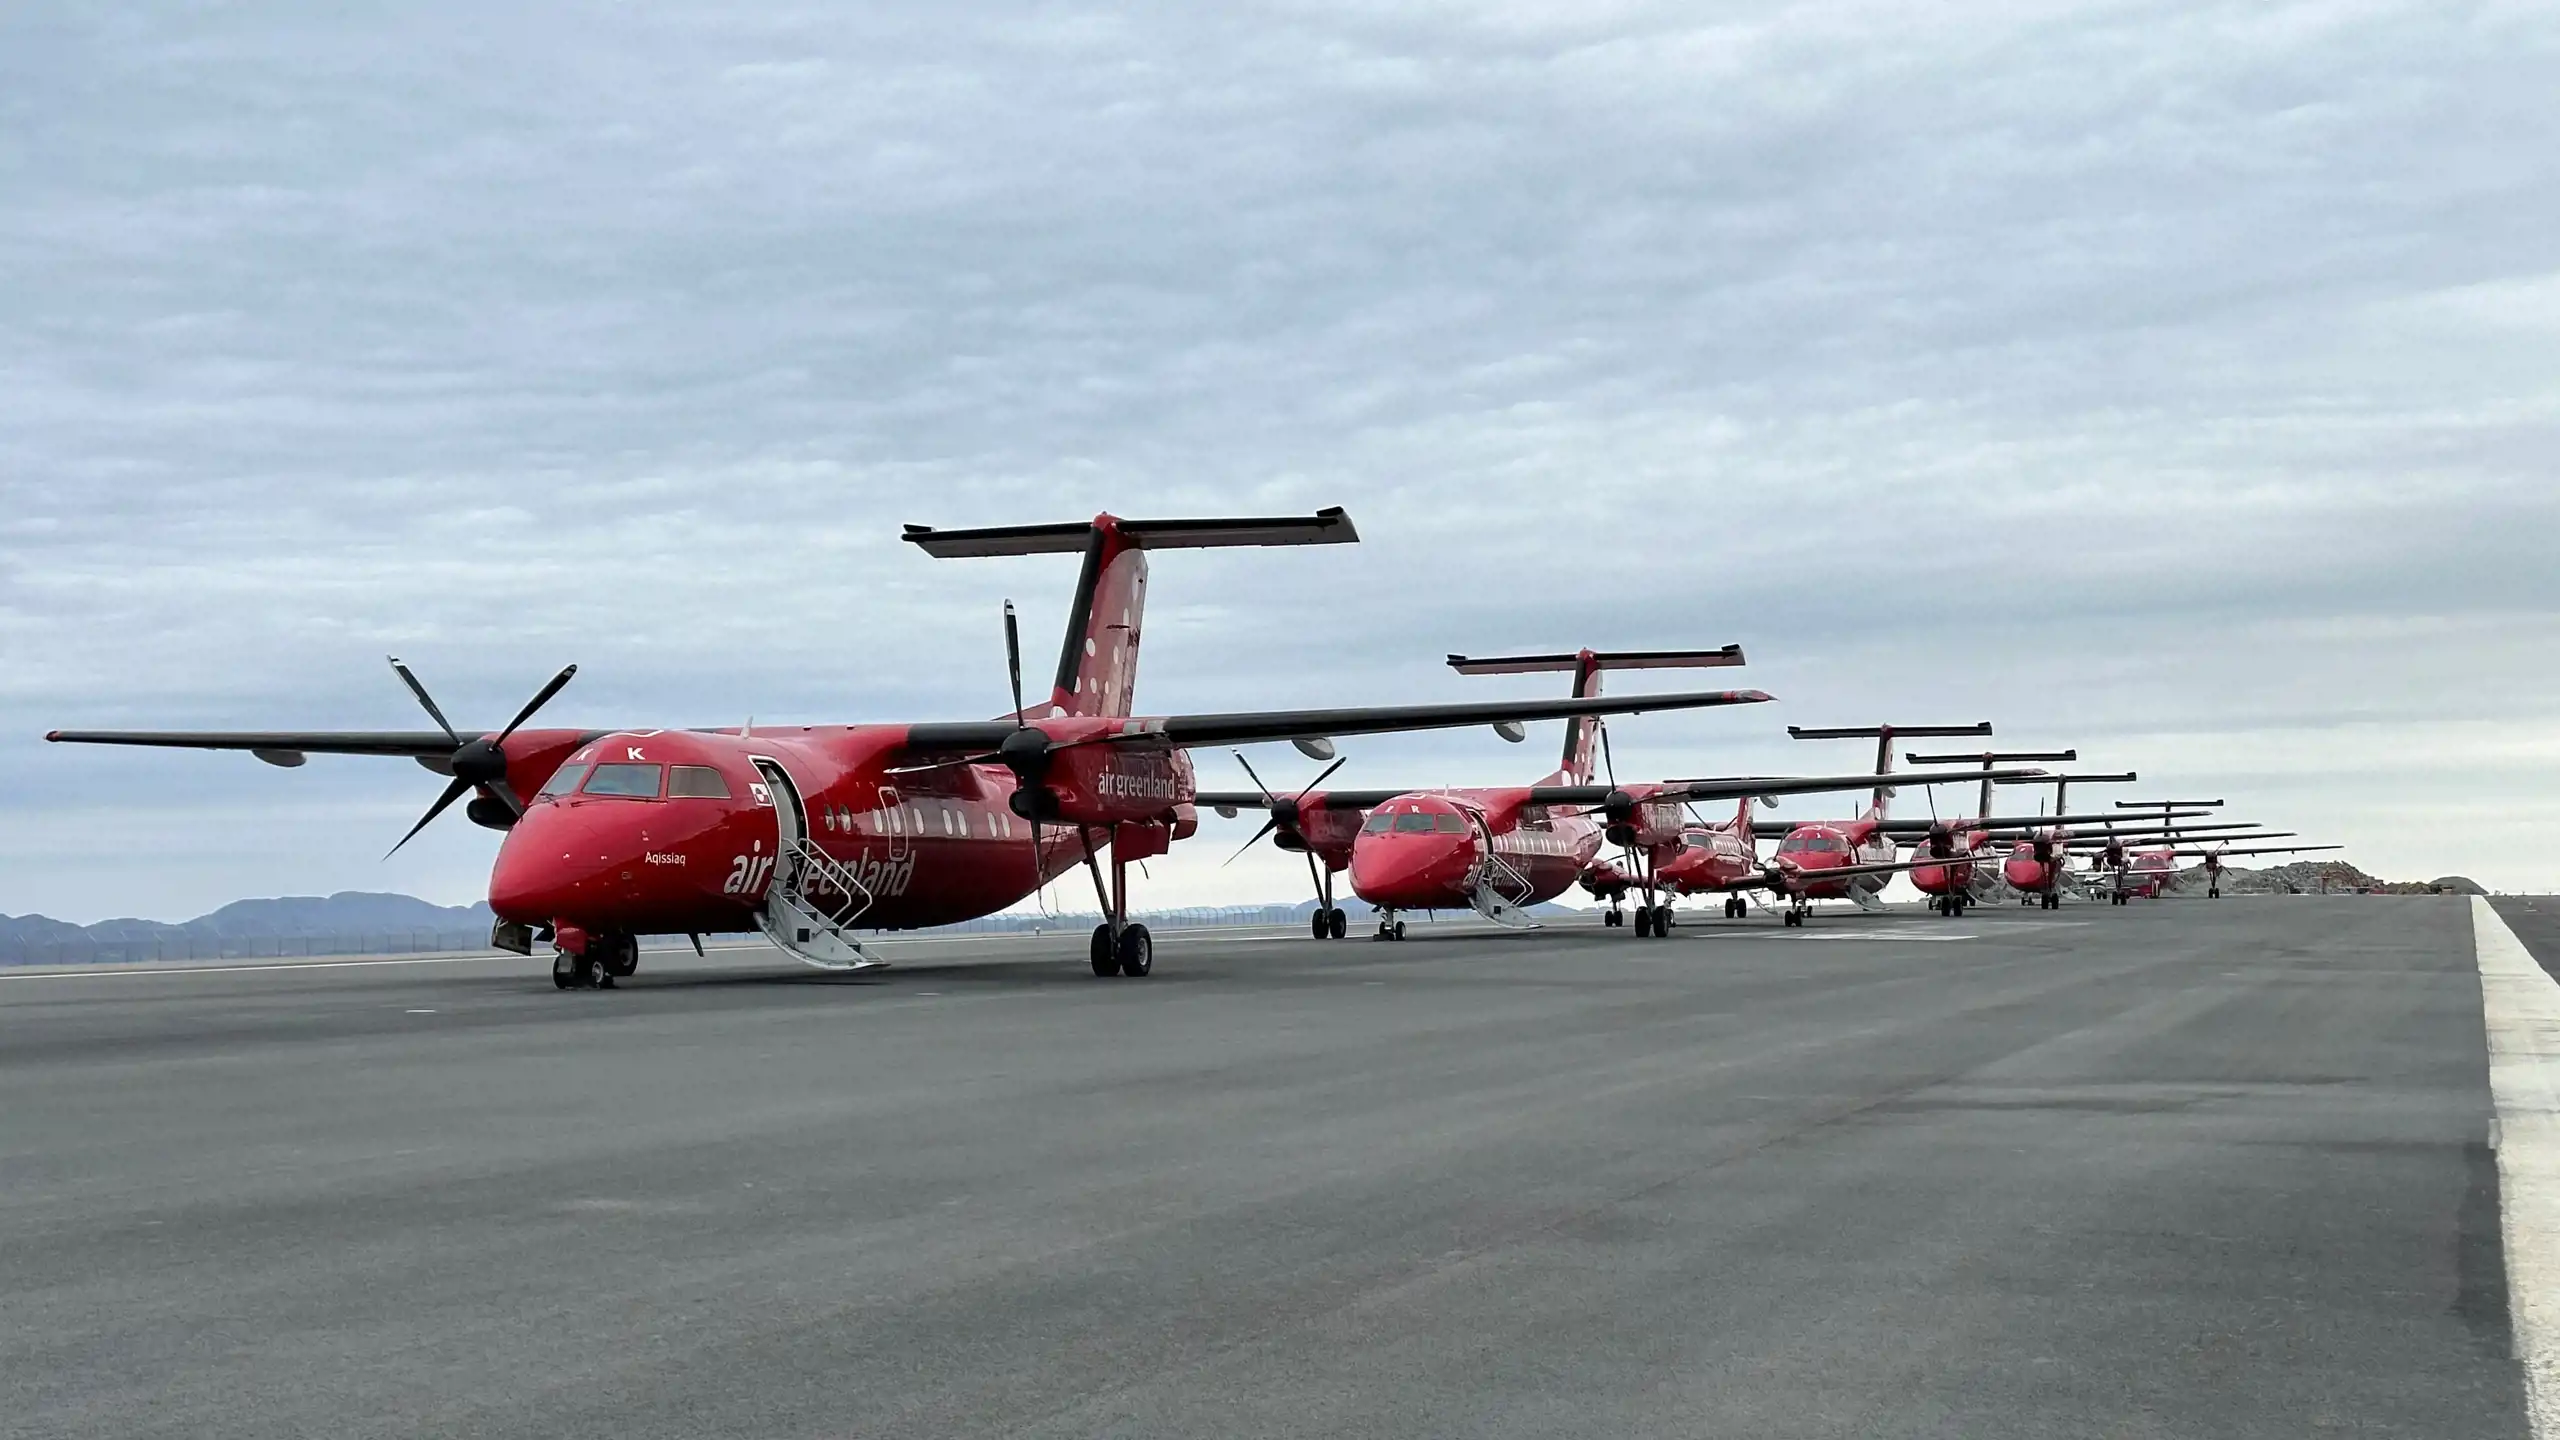 Dash-8 and King Air in a row. Thanks to Lars Nielsen, our aircraft technician apprentice, for the photo .